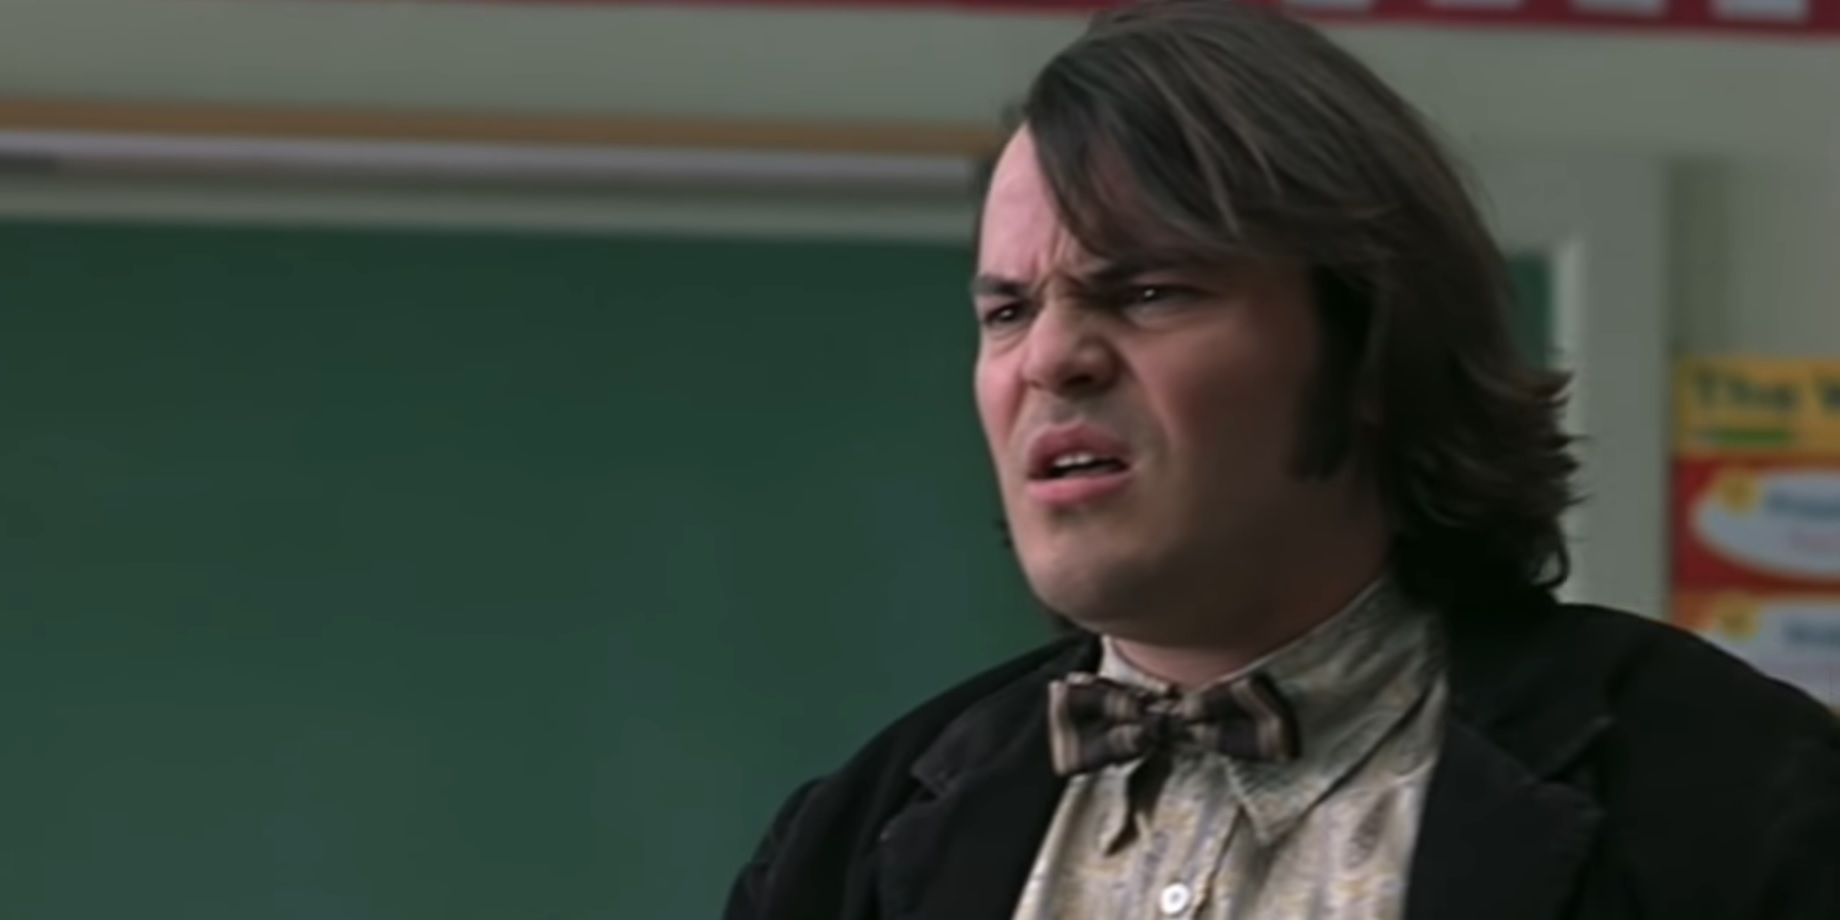 Dewey gives a lecture on The Man in School of Rock